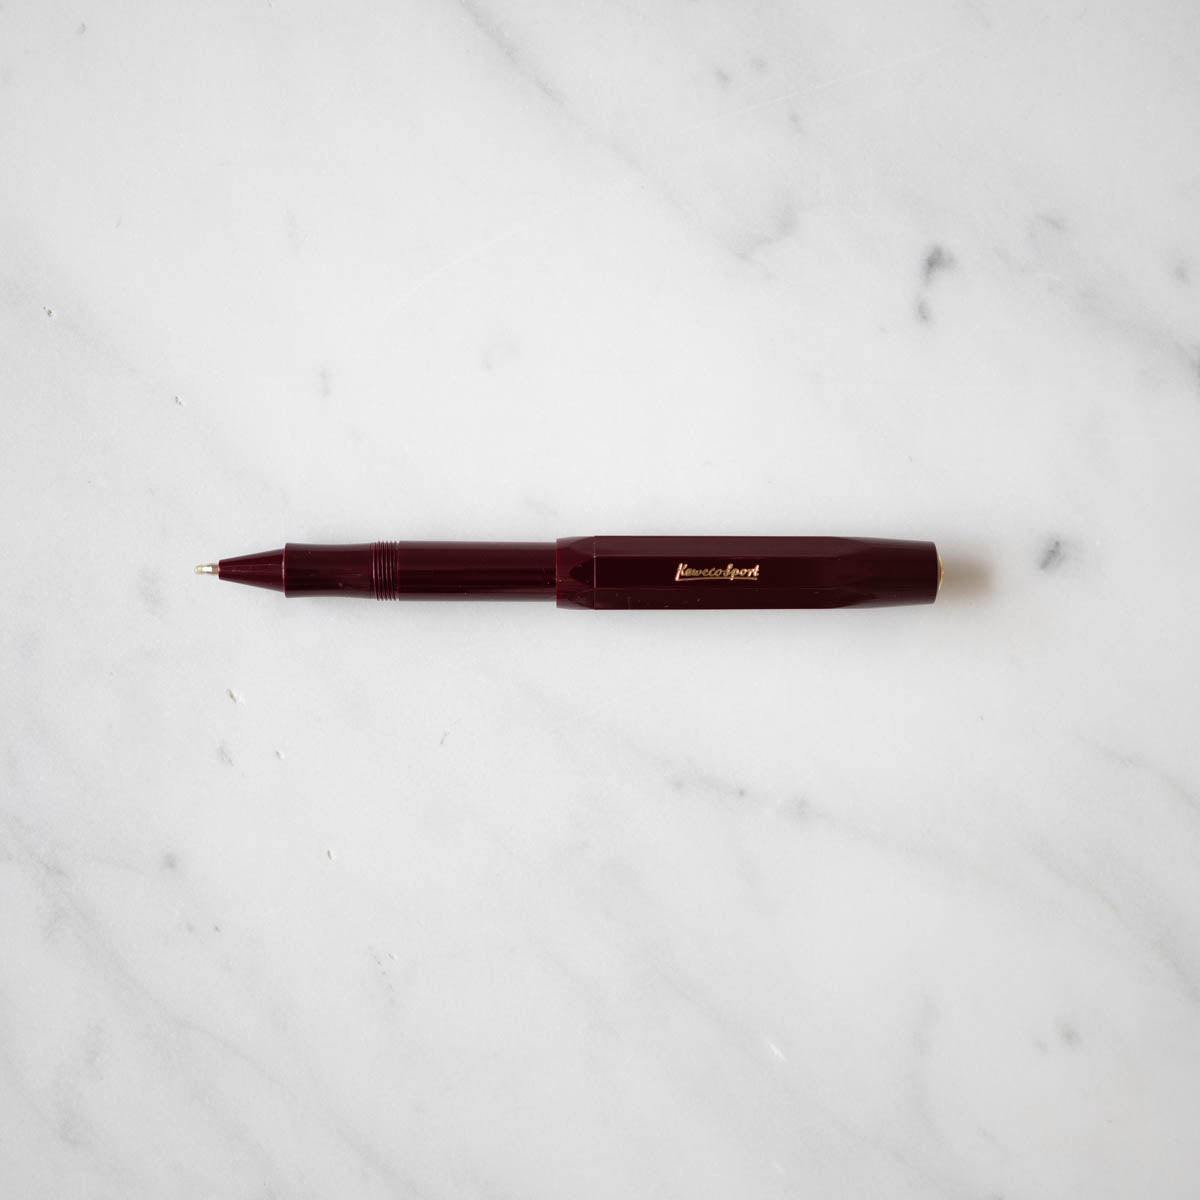 kaweco rollerball pen – June Home Supply